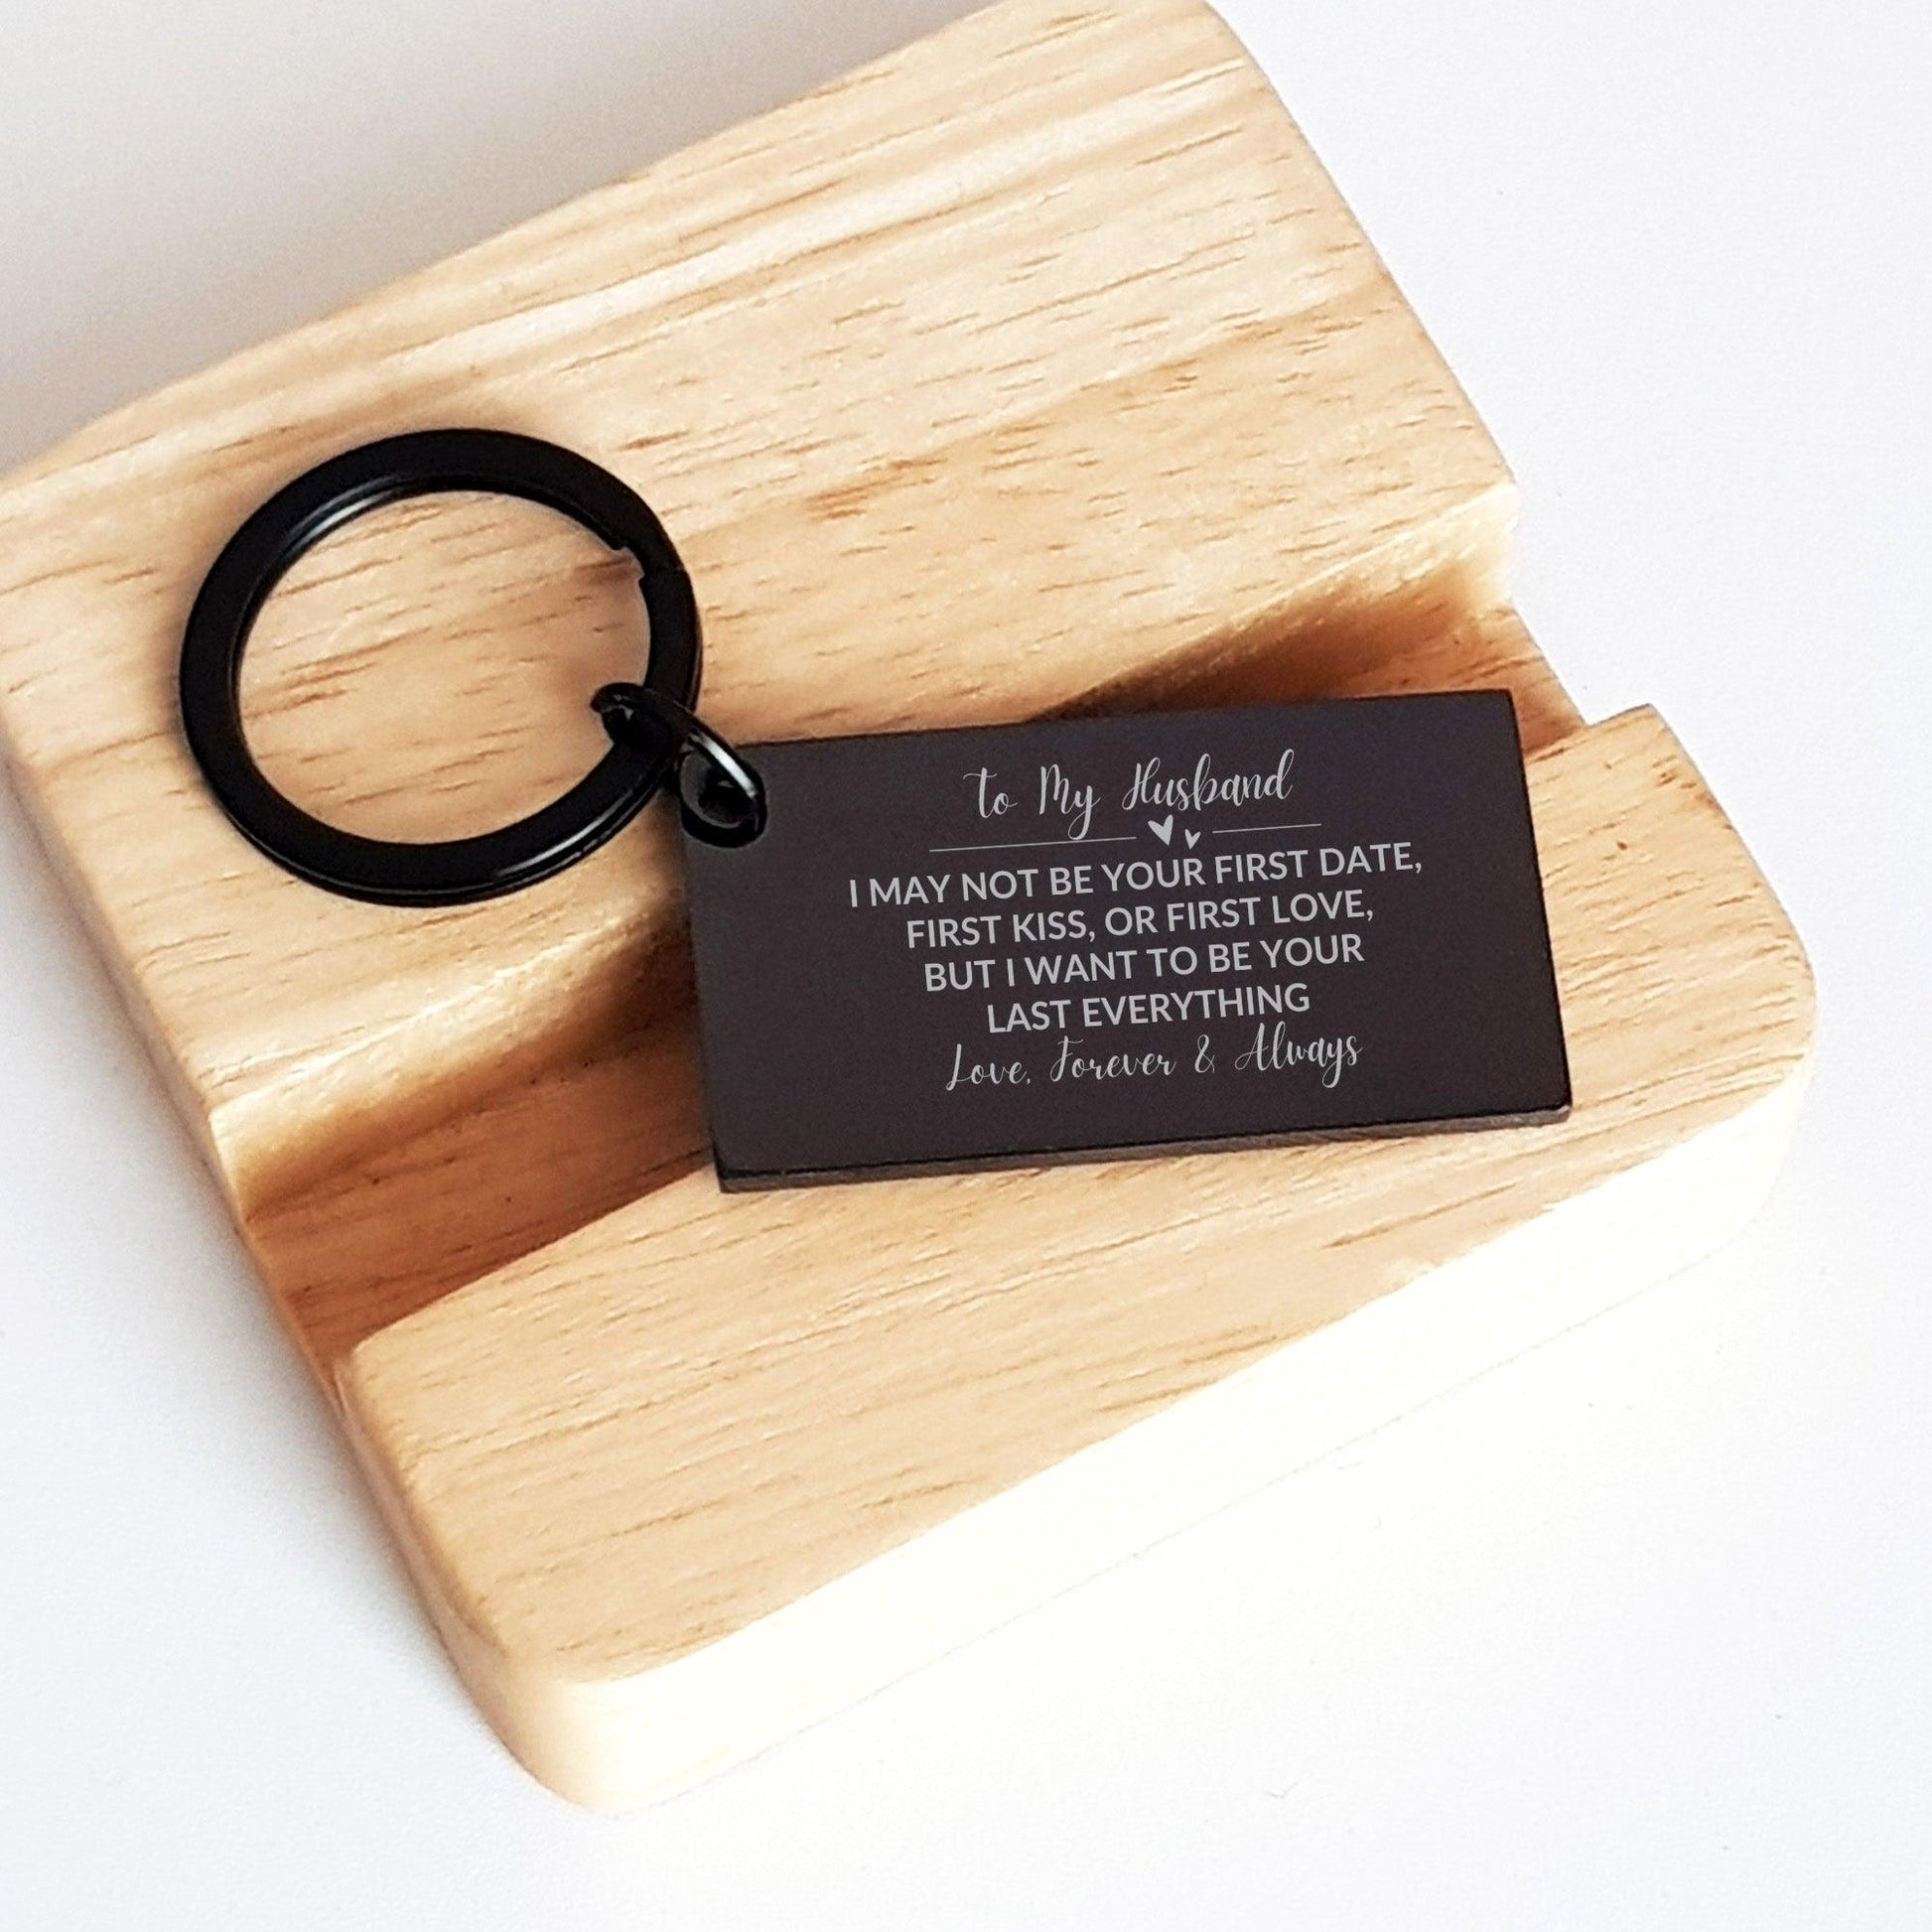 To My Husband I Want to Be Your Last Everything Black Engraved Keychain Romantic Valentine Gift - Mallard Moon Gift Shop